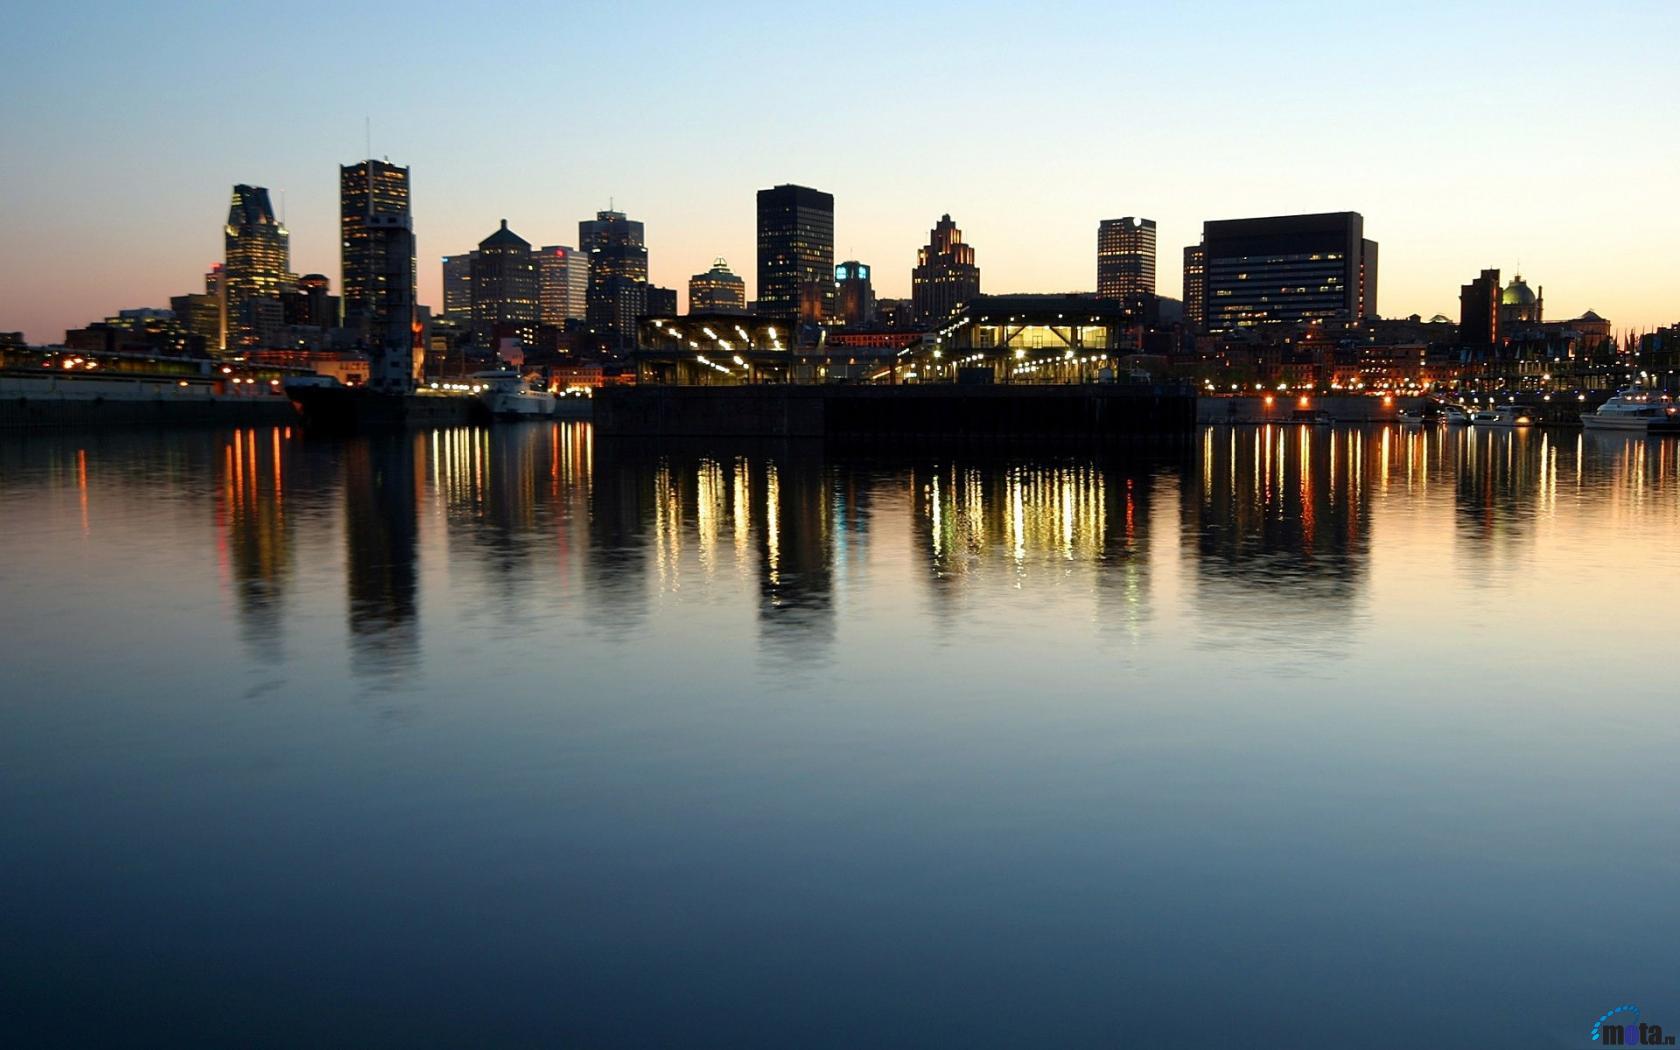 Images, Wallpaper of Quebec in HD Quality: BsnSCB